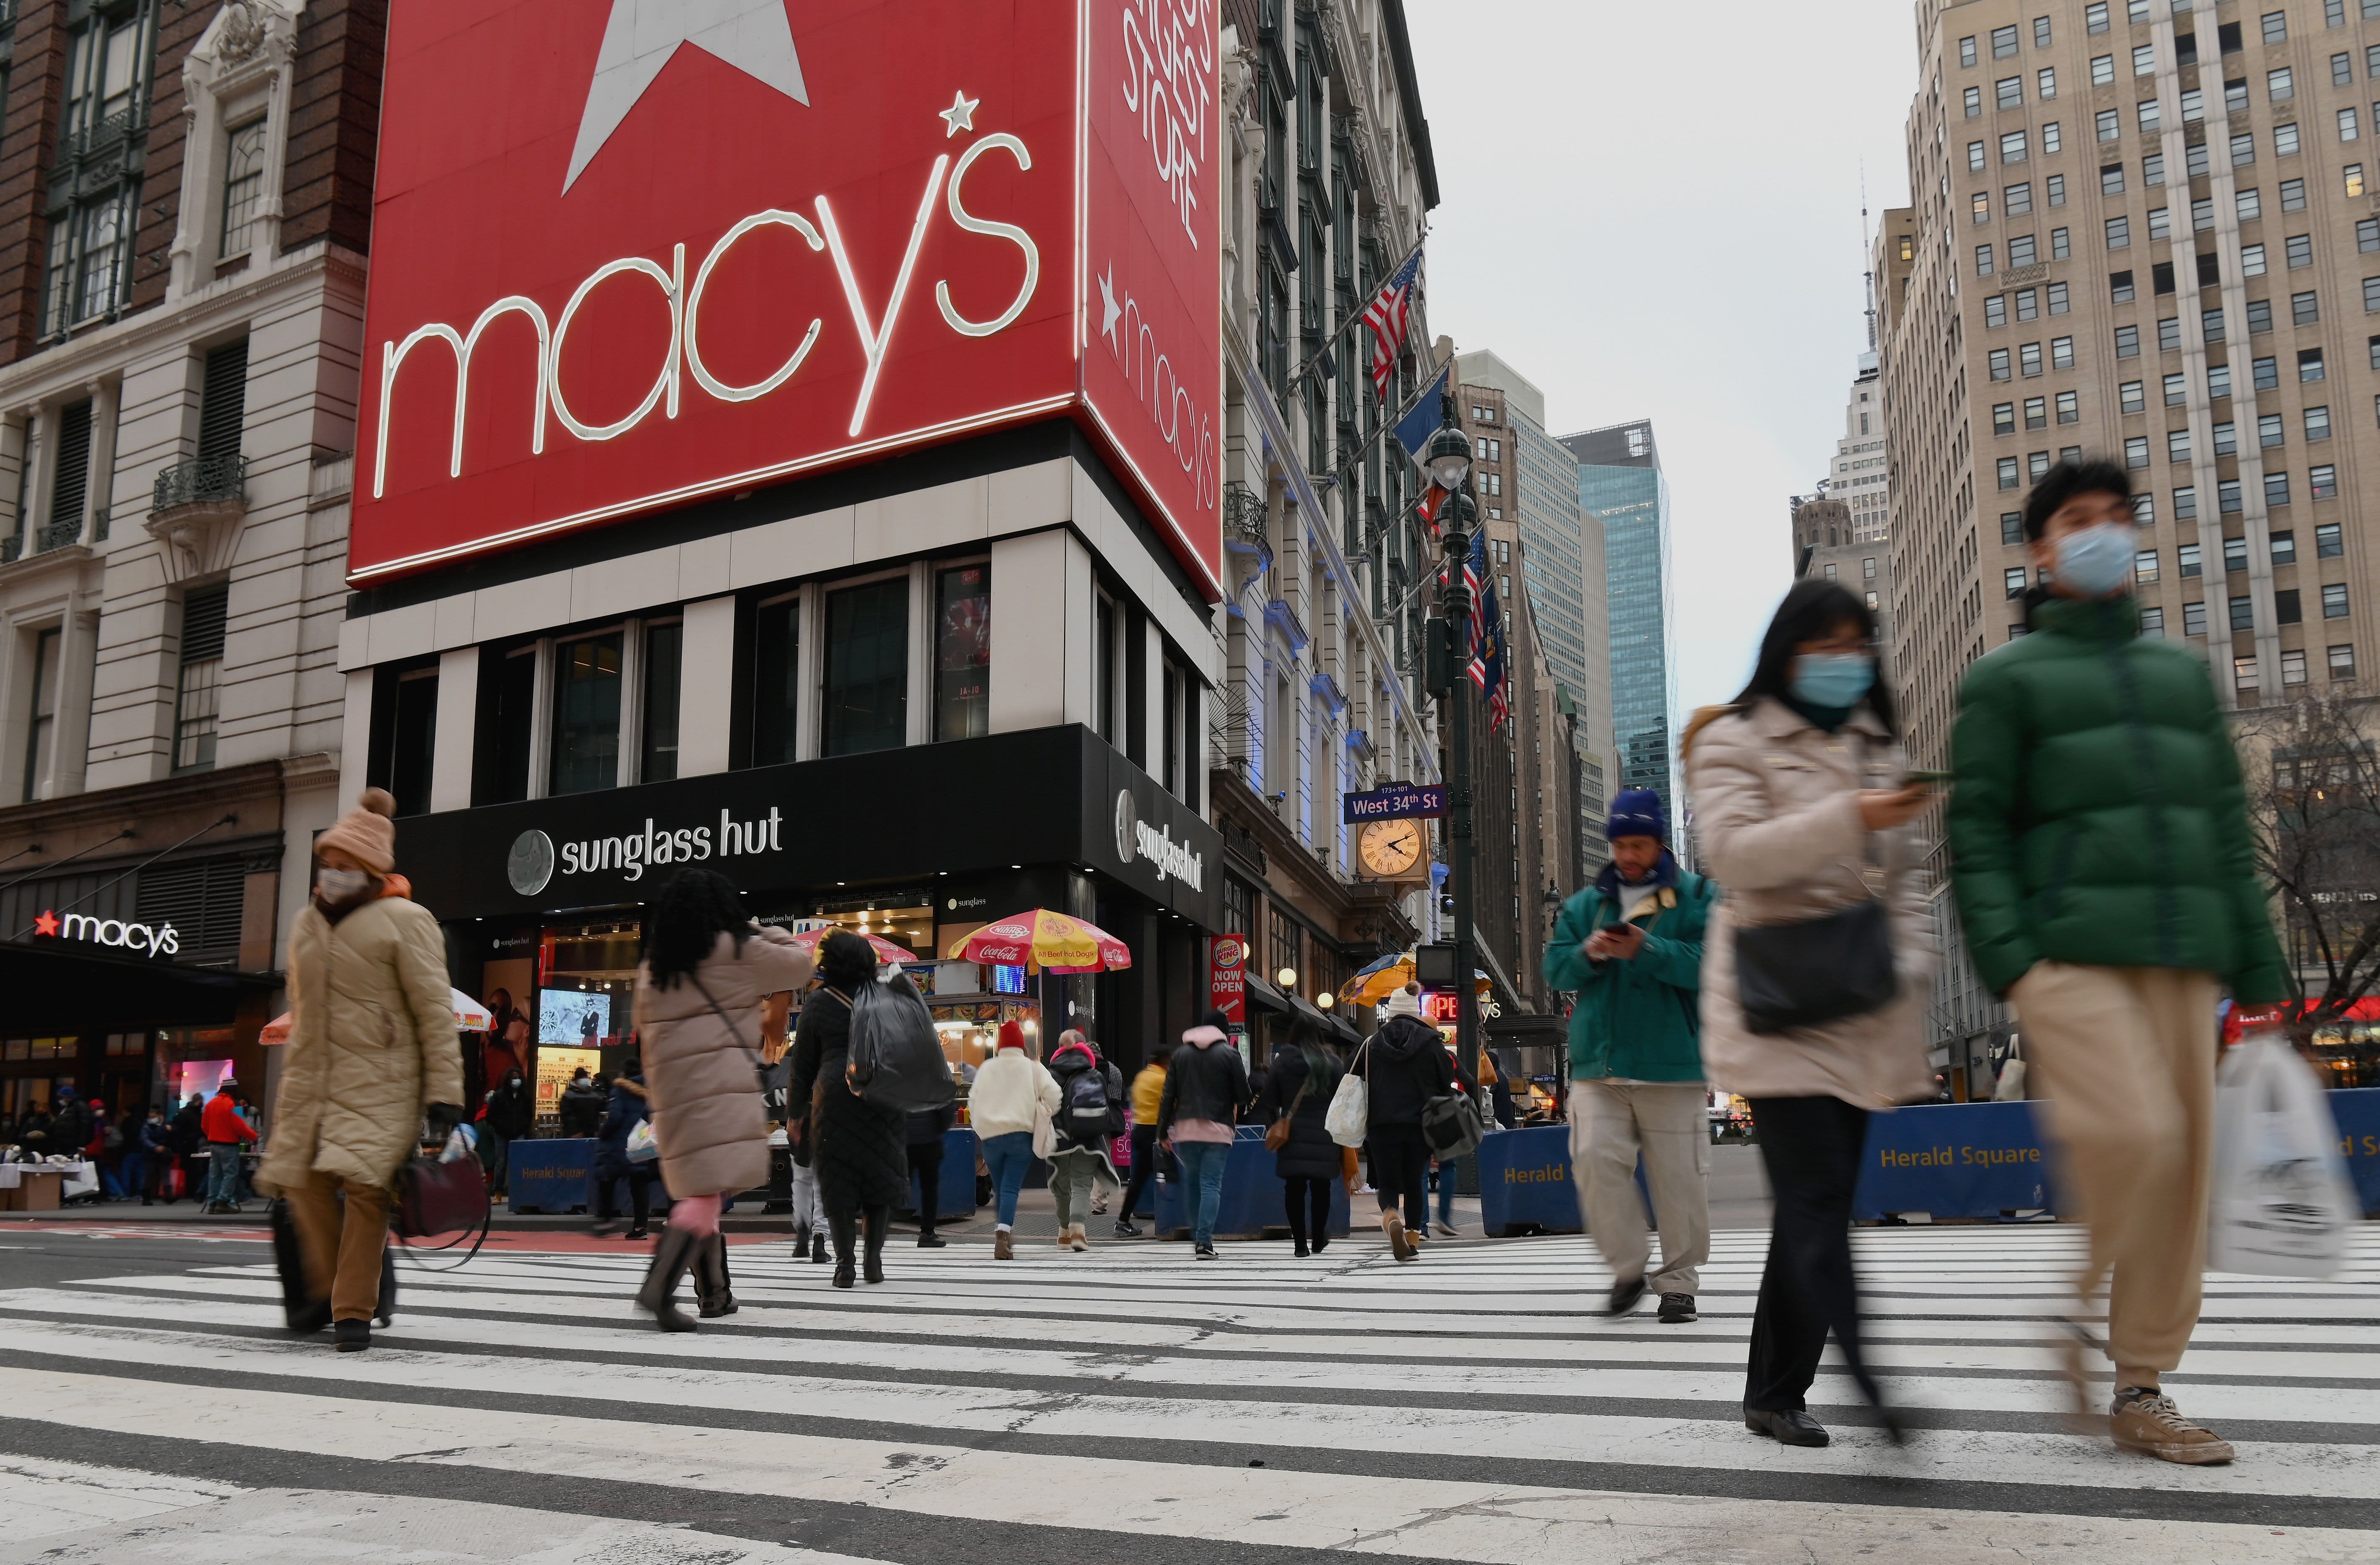 Macy’s (M) reports fourth quarter 2020 earnings, sales exceeded